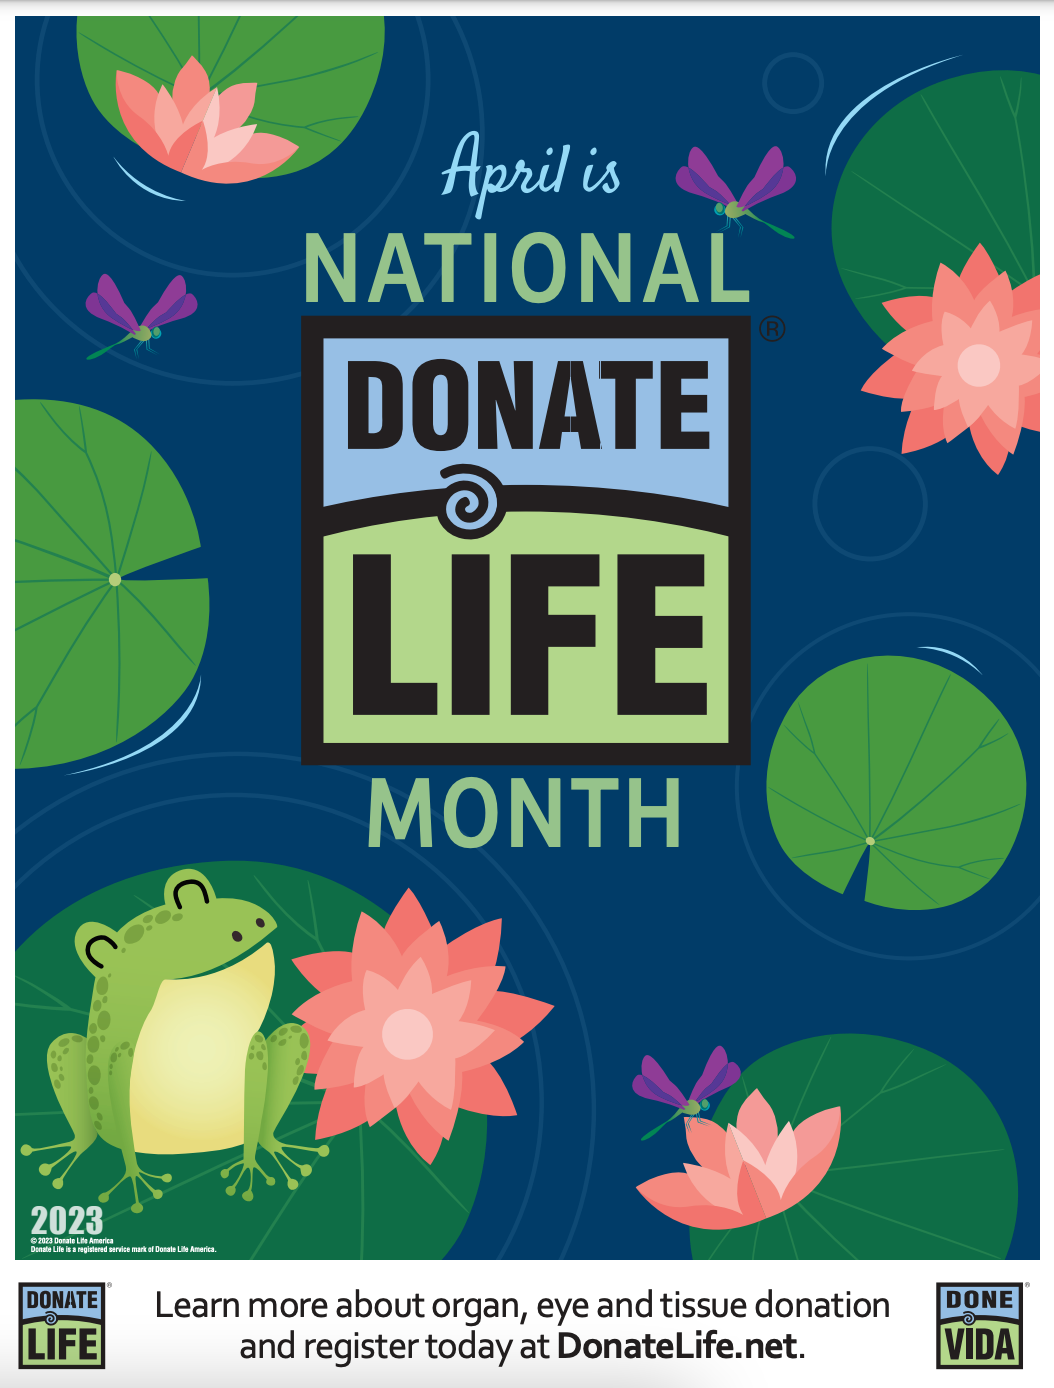 A flyer for National Donate Life organ and tissue donation.